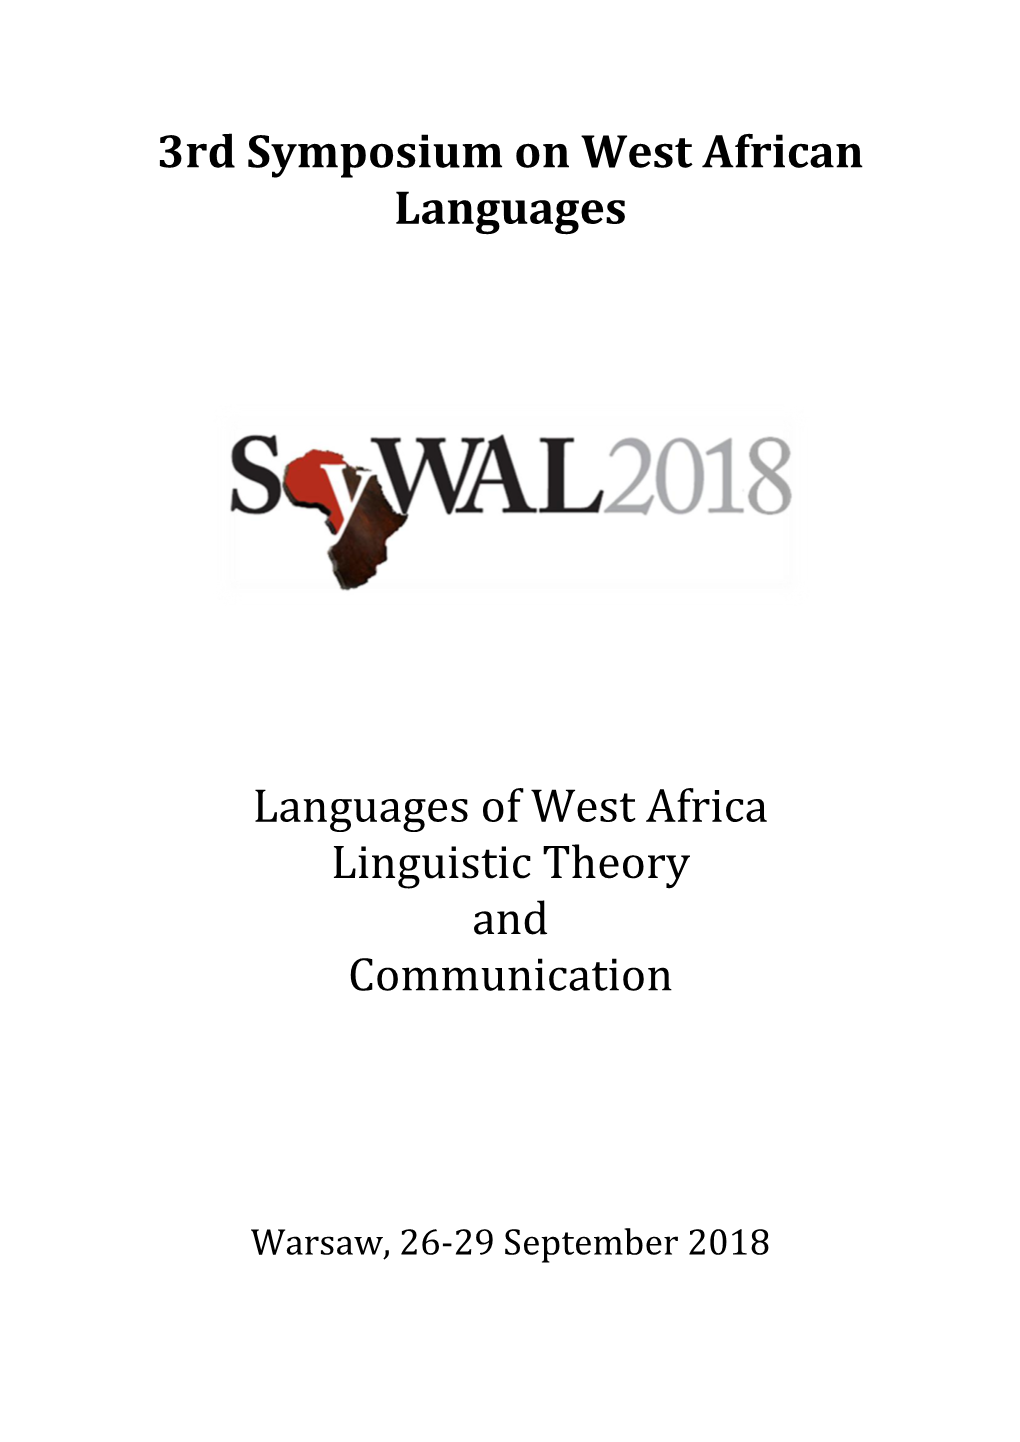 3Rd Symposium on West African Languages Languages of West Africa Linguistic Theory and Communication